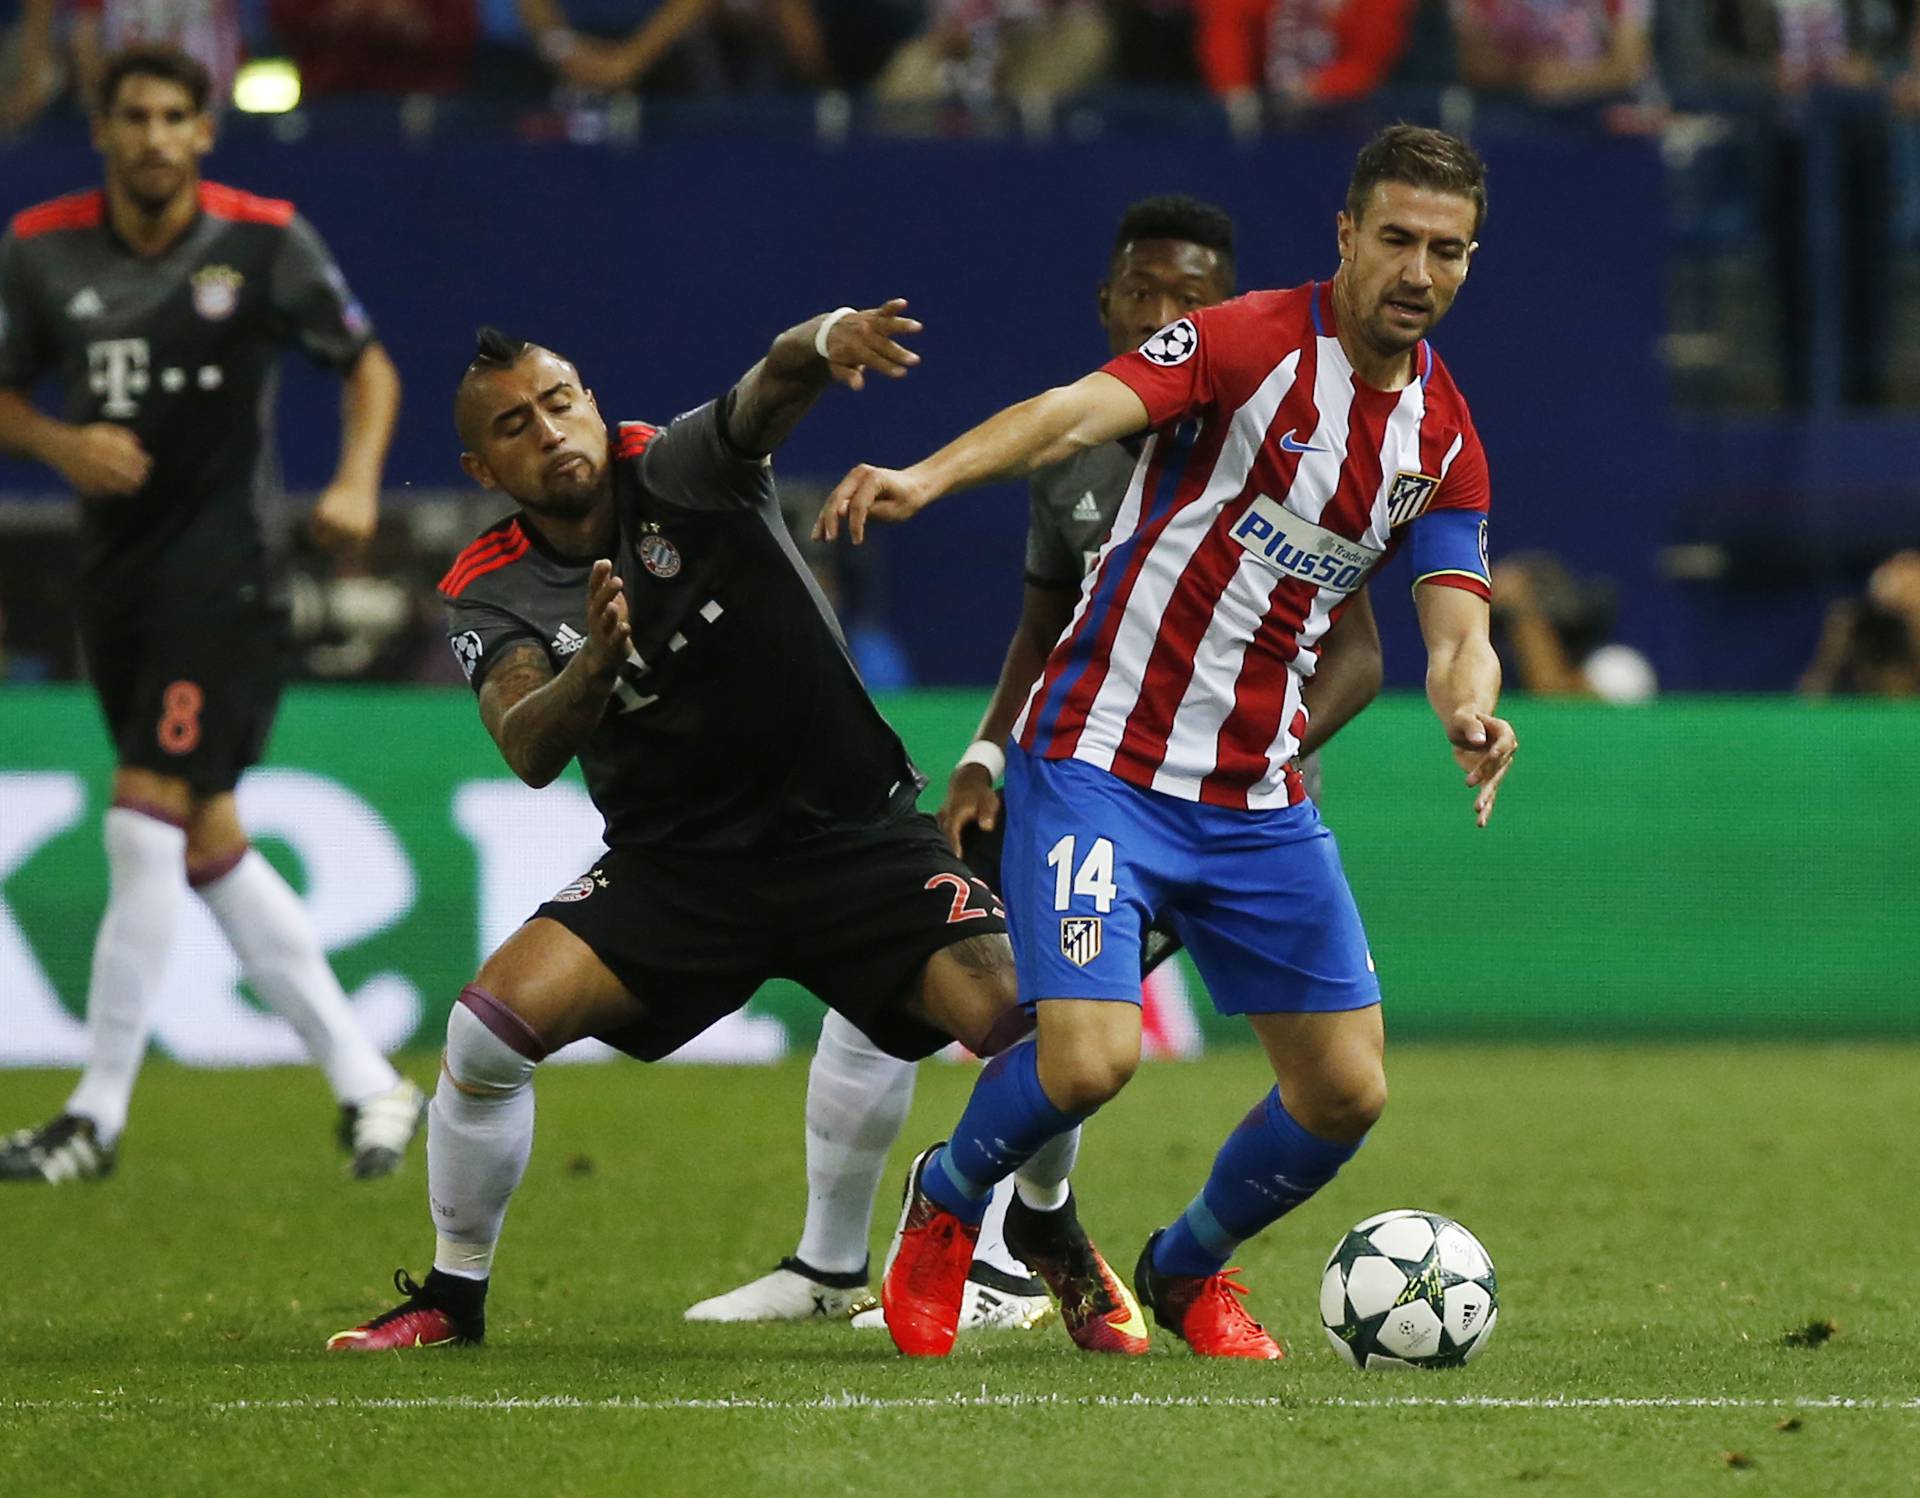 Atletico Madrid v Bayern Munich - UEFA Champions League Group Stage - Group D